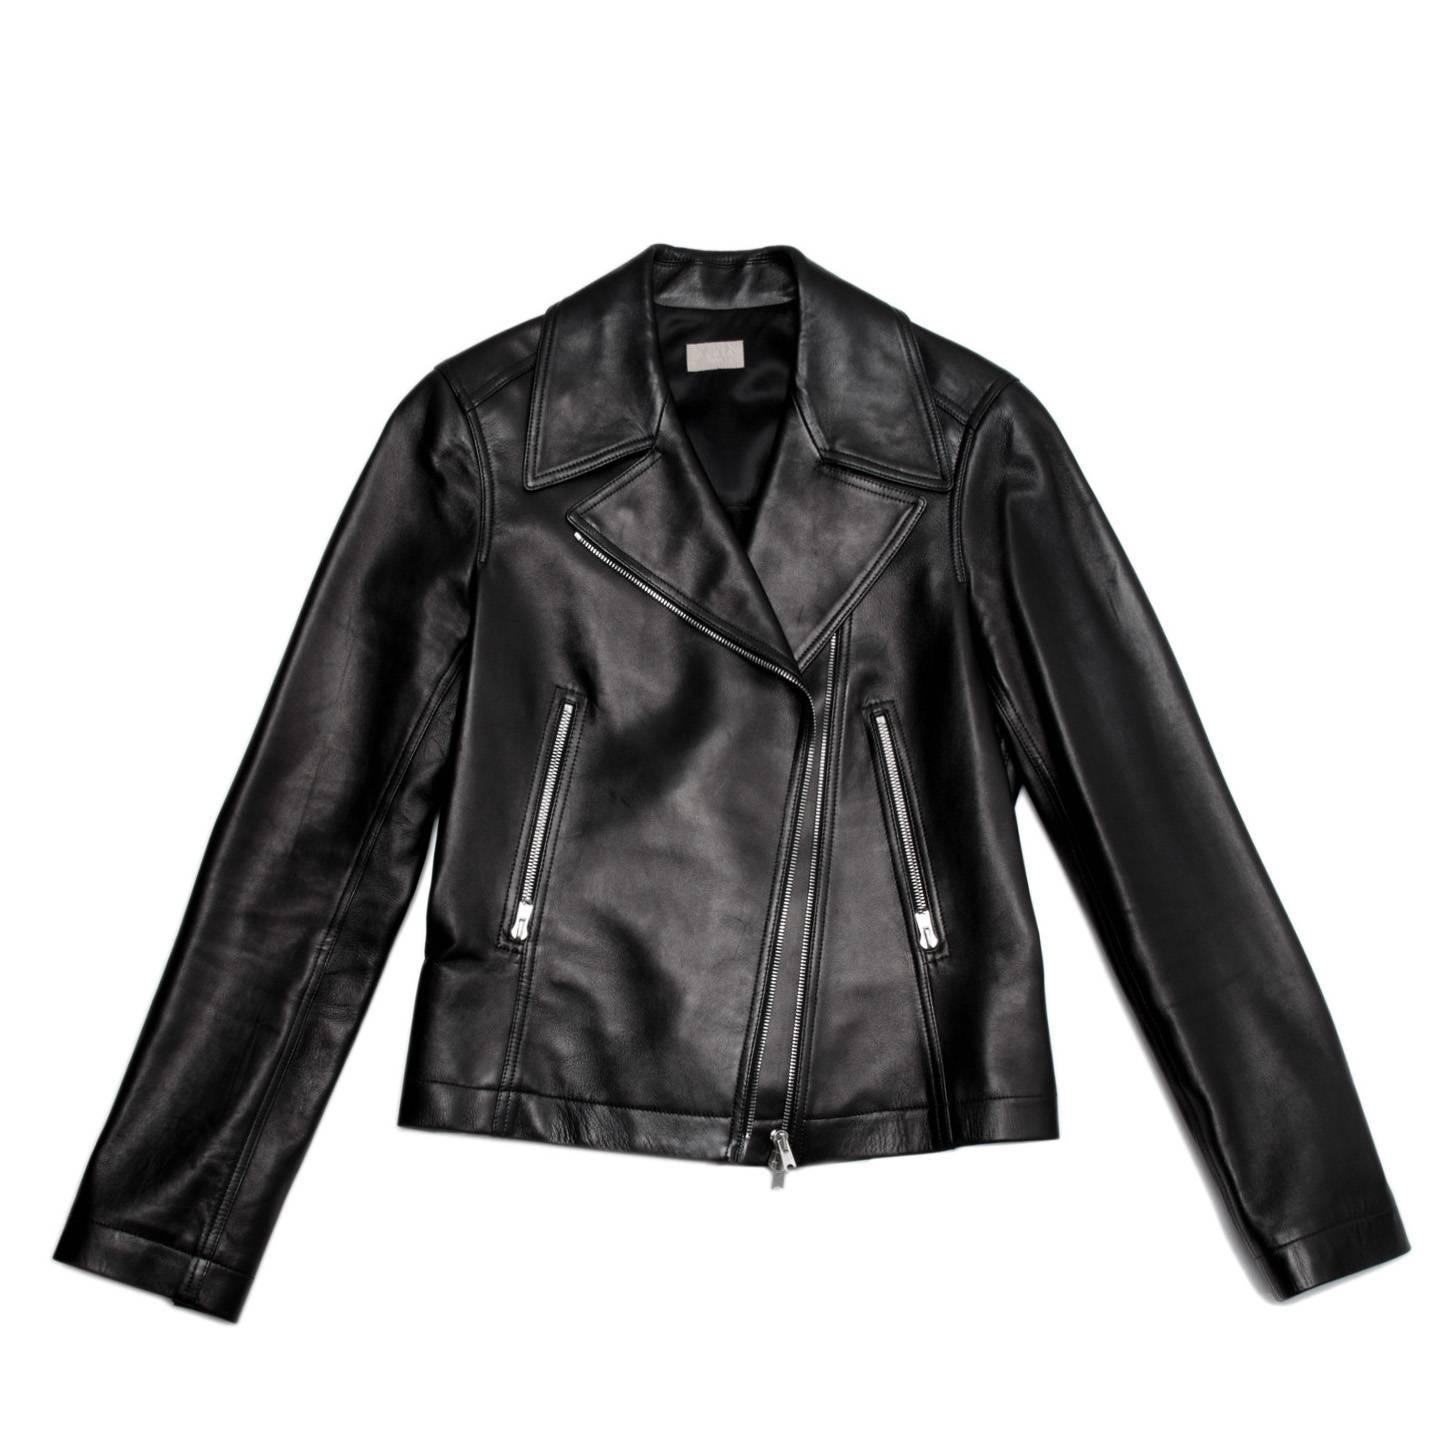 Black lambskin leather motorcycle style jacket with silver metal zipper front pockets that mach the center front zipper and those at cuffs. The back darts form closed vents at bust, they are fixed at waist and then open at hem as inverted pleats. A